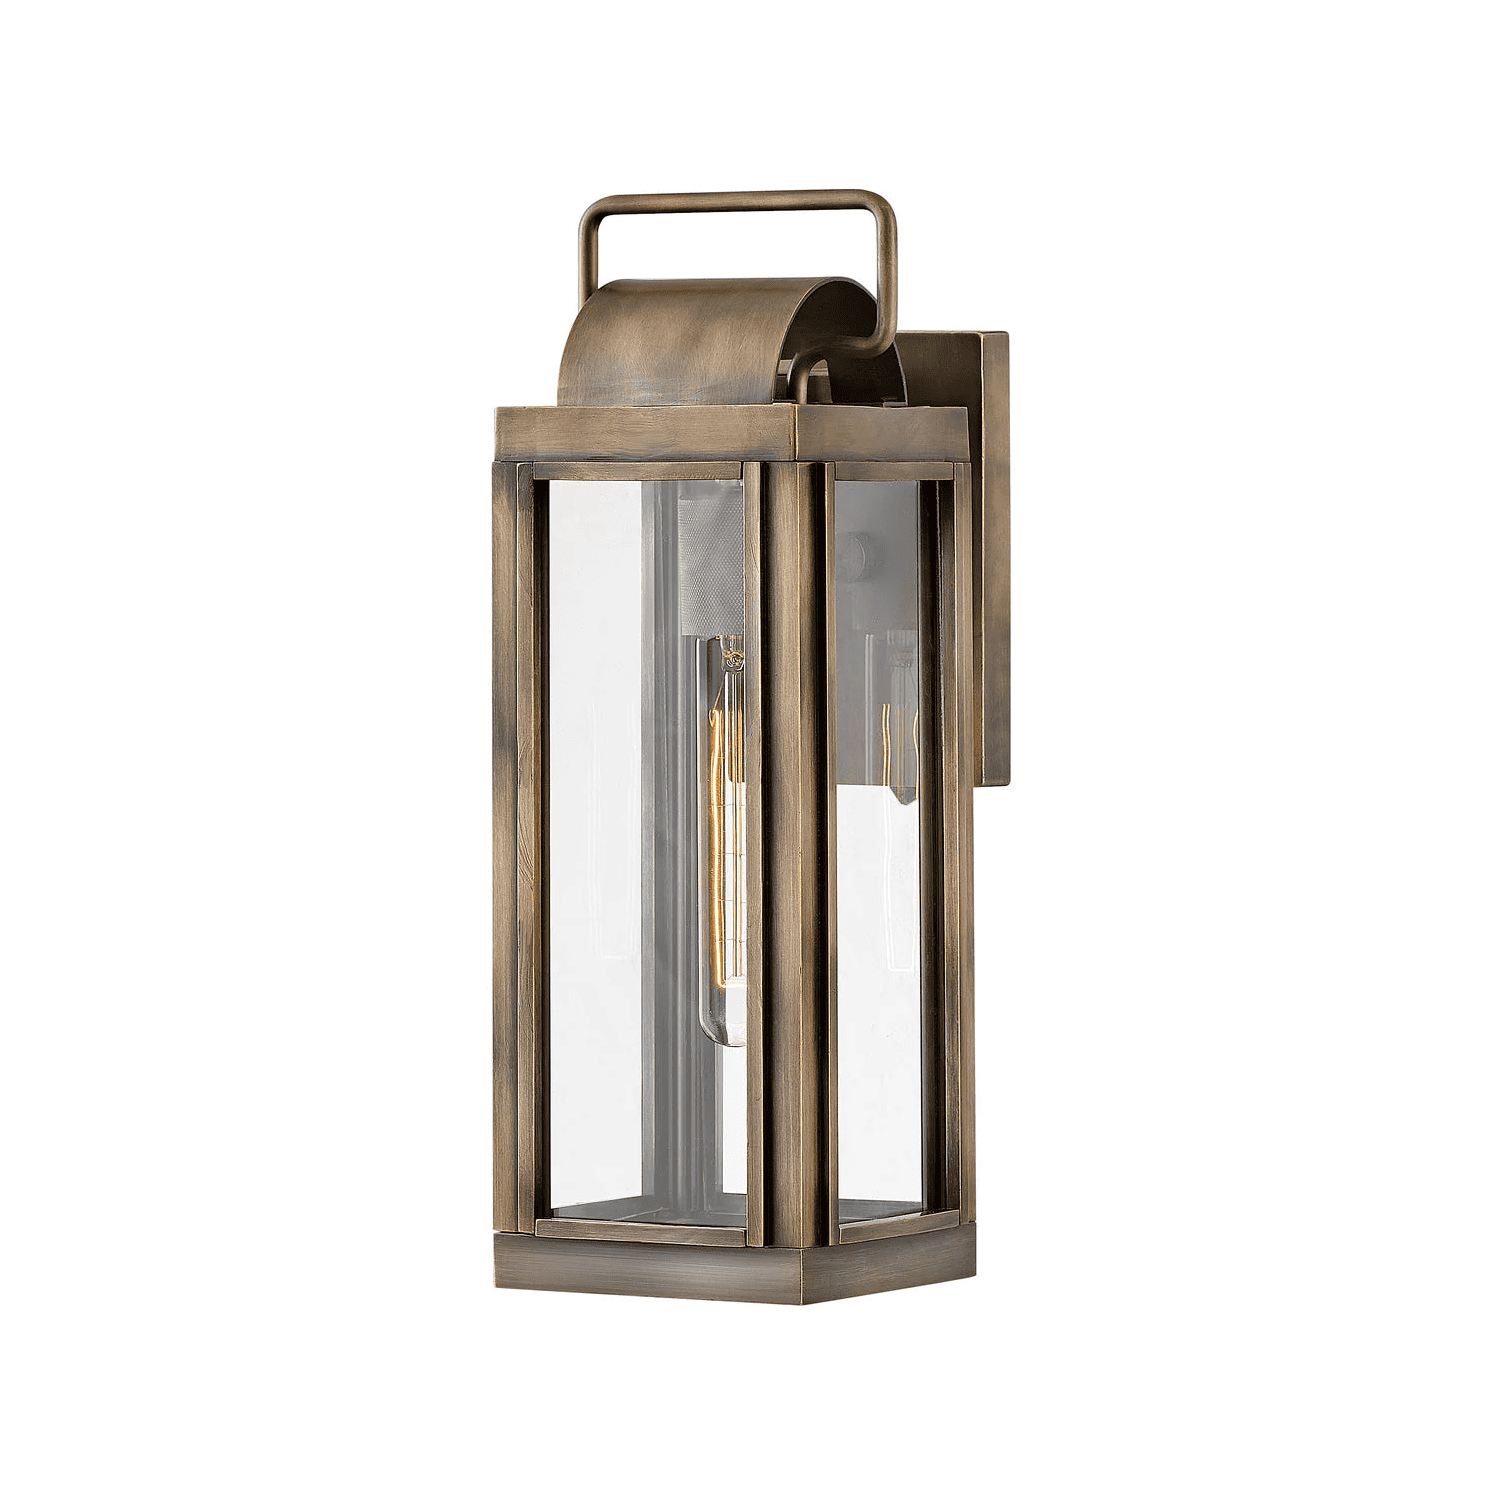 Product Image of a 2840BU Sag Habour Wall Lantern in Bronze finish